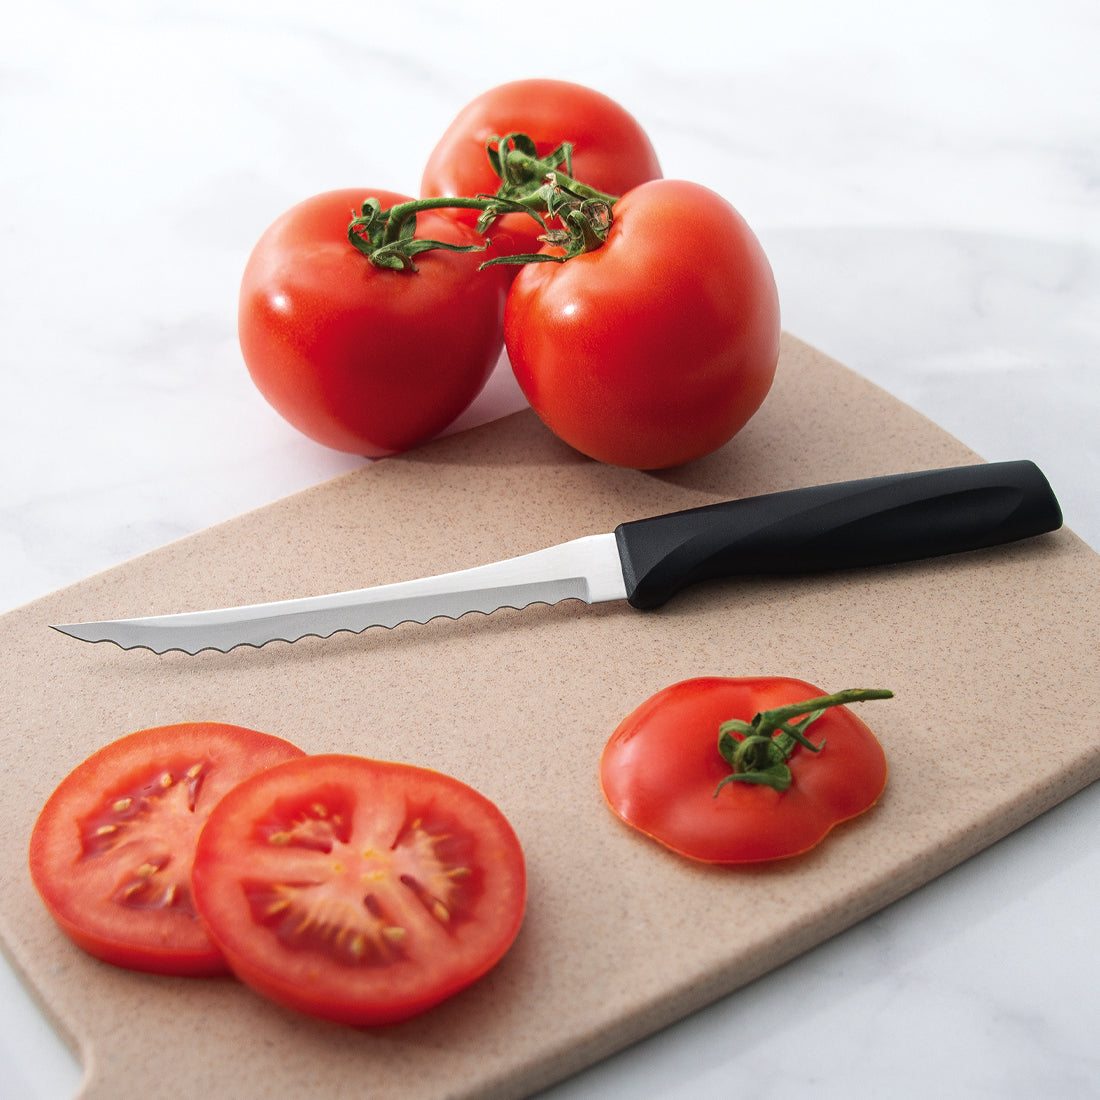 An Anthem Wave Tomato Slicer on a tan cutting board with sliced tomatoes